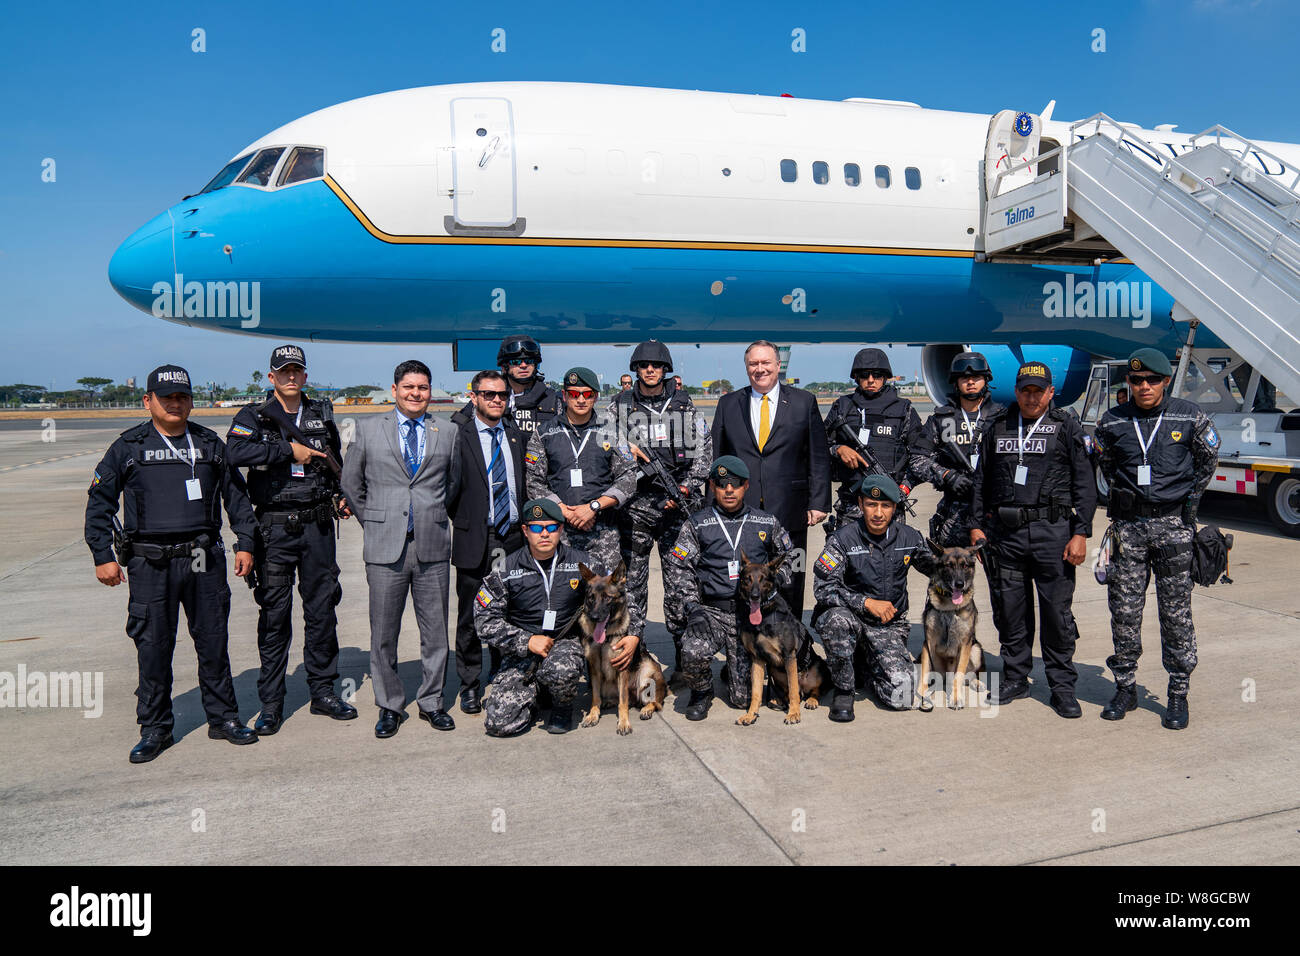 U.S. Secretary of State Michael R. Pompeo poses for a photo with local police prior to departure from Guayaquil, Ecuador, July 20, 2019. Stock Photo